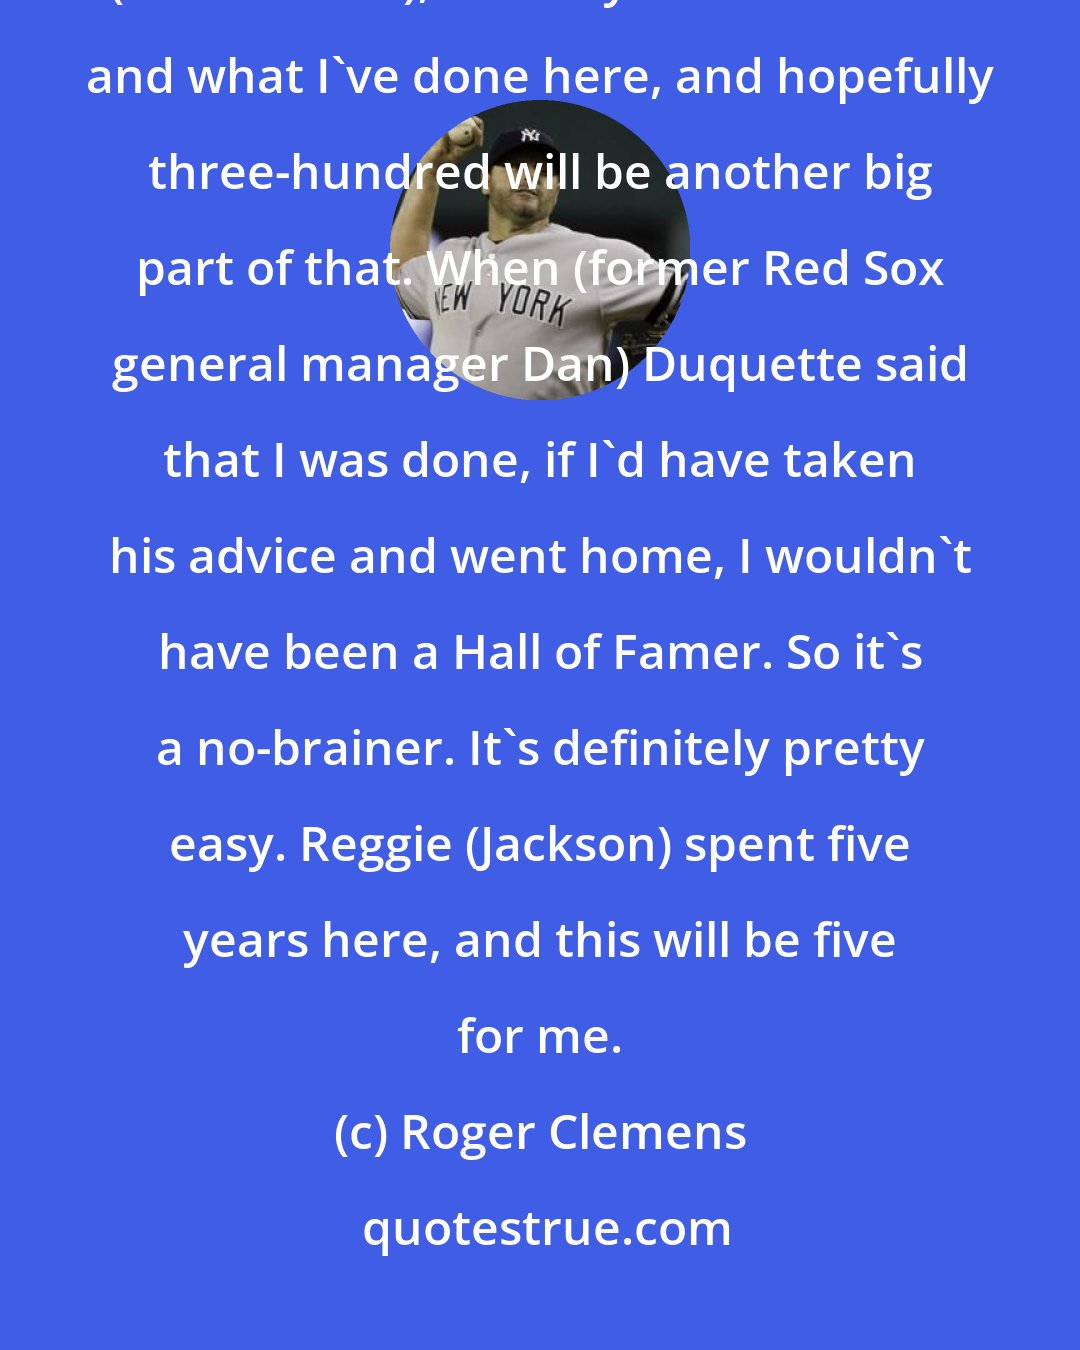 Roger Clemens: It's pretty simple, the way I look at it. I became a Hall of Famer here (in New York), with my numbers here and what I've done here, and hopefully three-hundred will be another big part of that. When (former Red Sox general manager Dan) Duquette said that I was done, if I'd have taken his advice and went home, I wouldn't have been a Hall of Famer. So it's a no-brainer. It's definitely pretty easy. Reggie (Jackson) spent five years here, and this will be five for me.